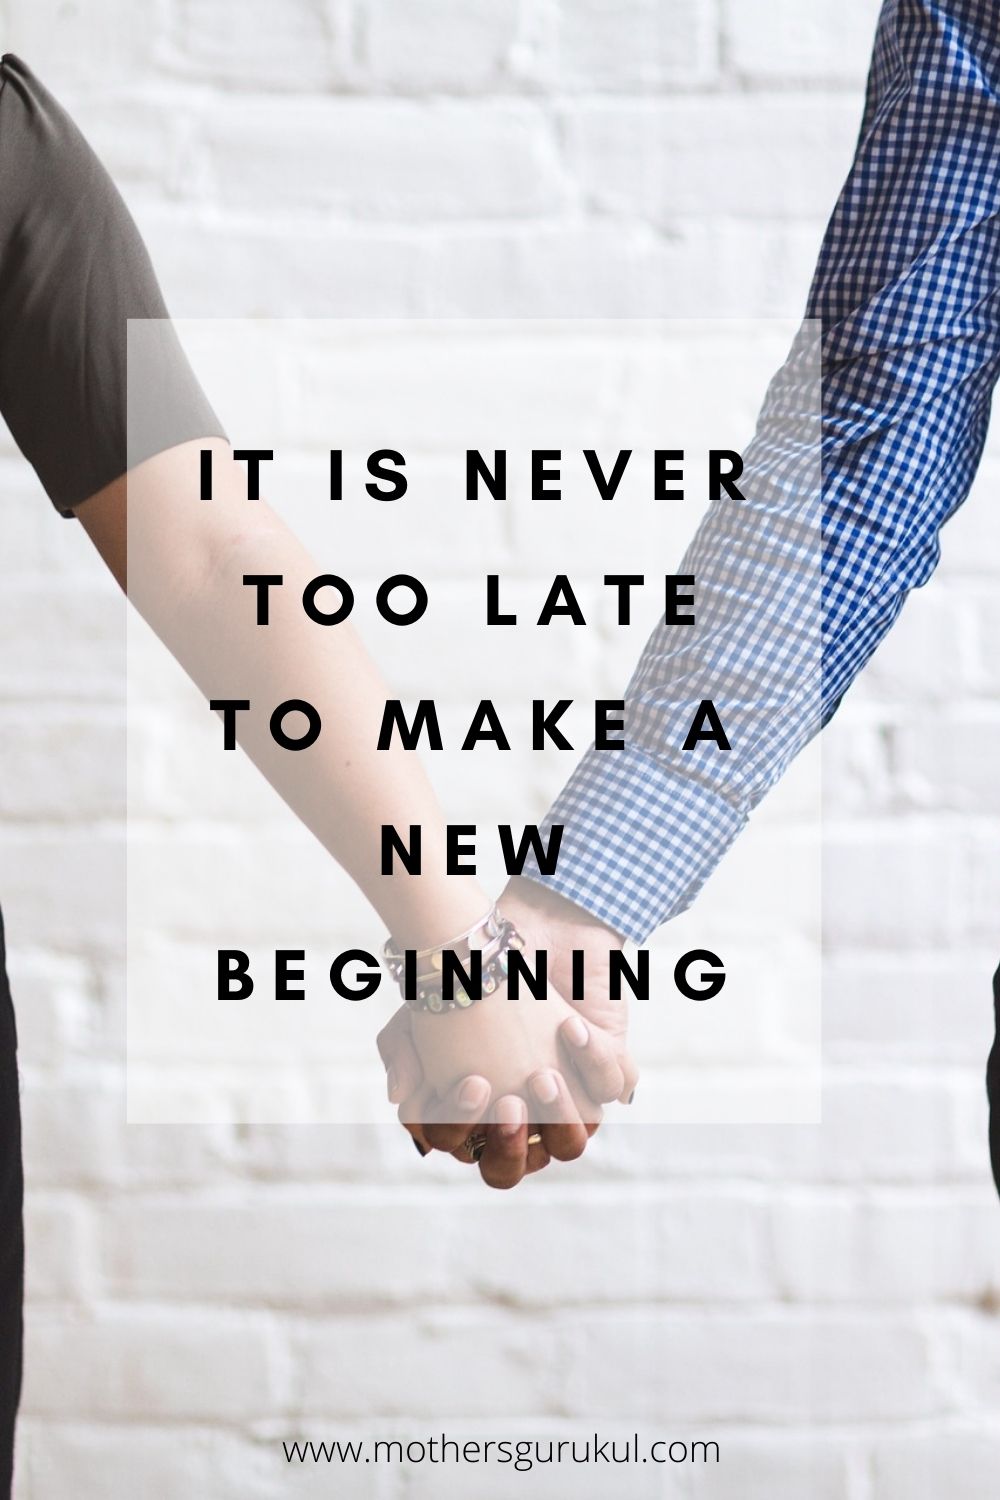 It is never too late to make a new beginning